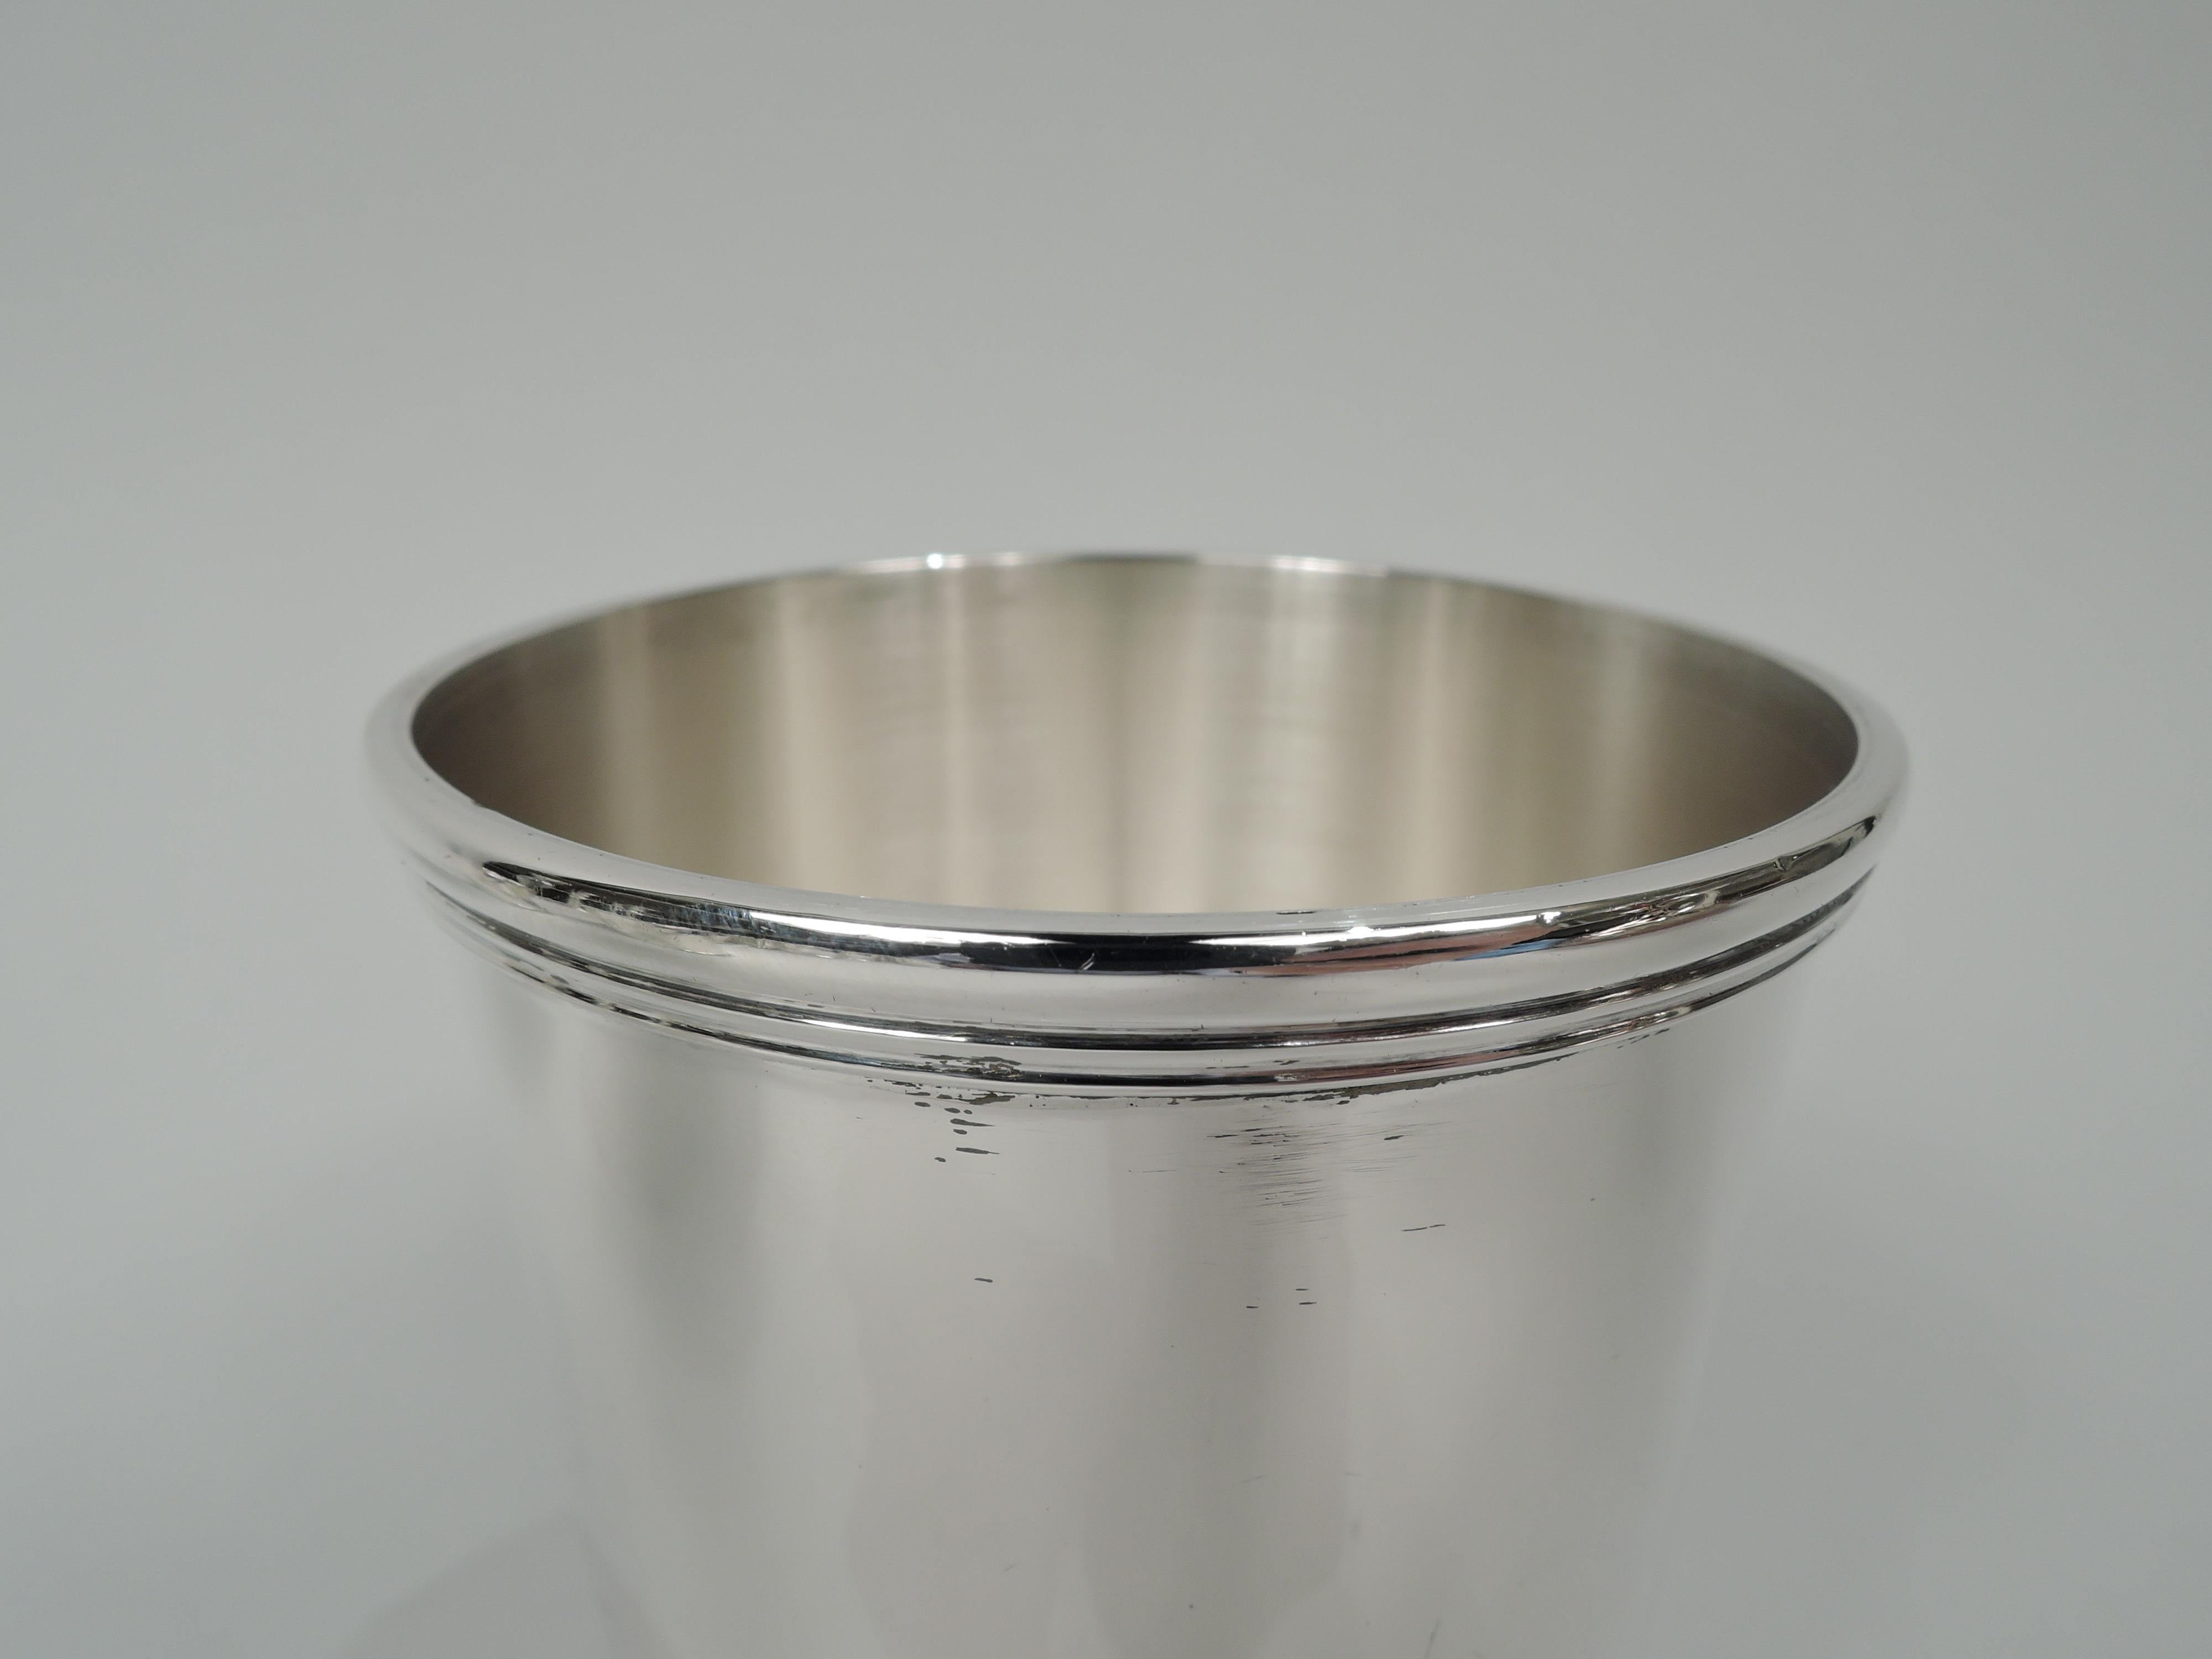 American Set of 4 International Sterling Silver Mint Julep Cups